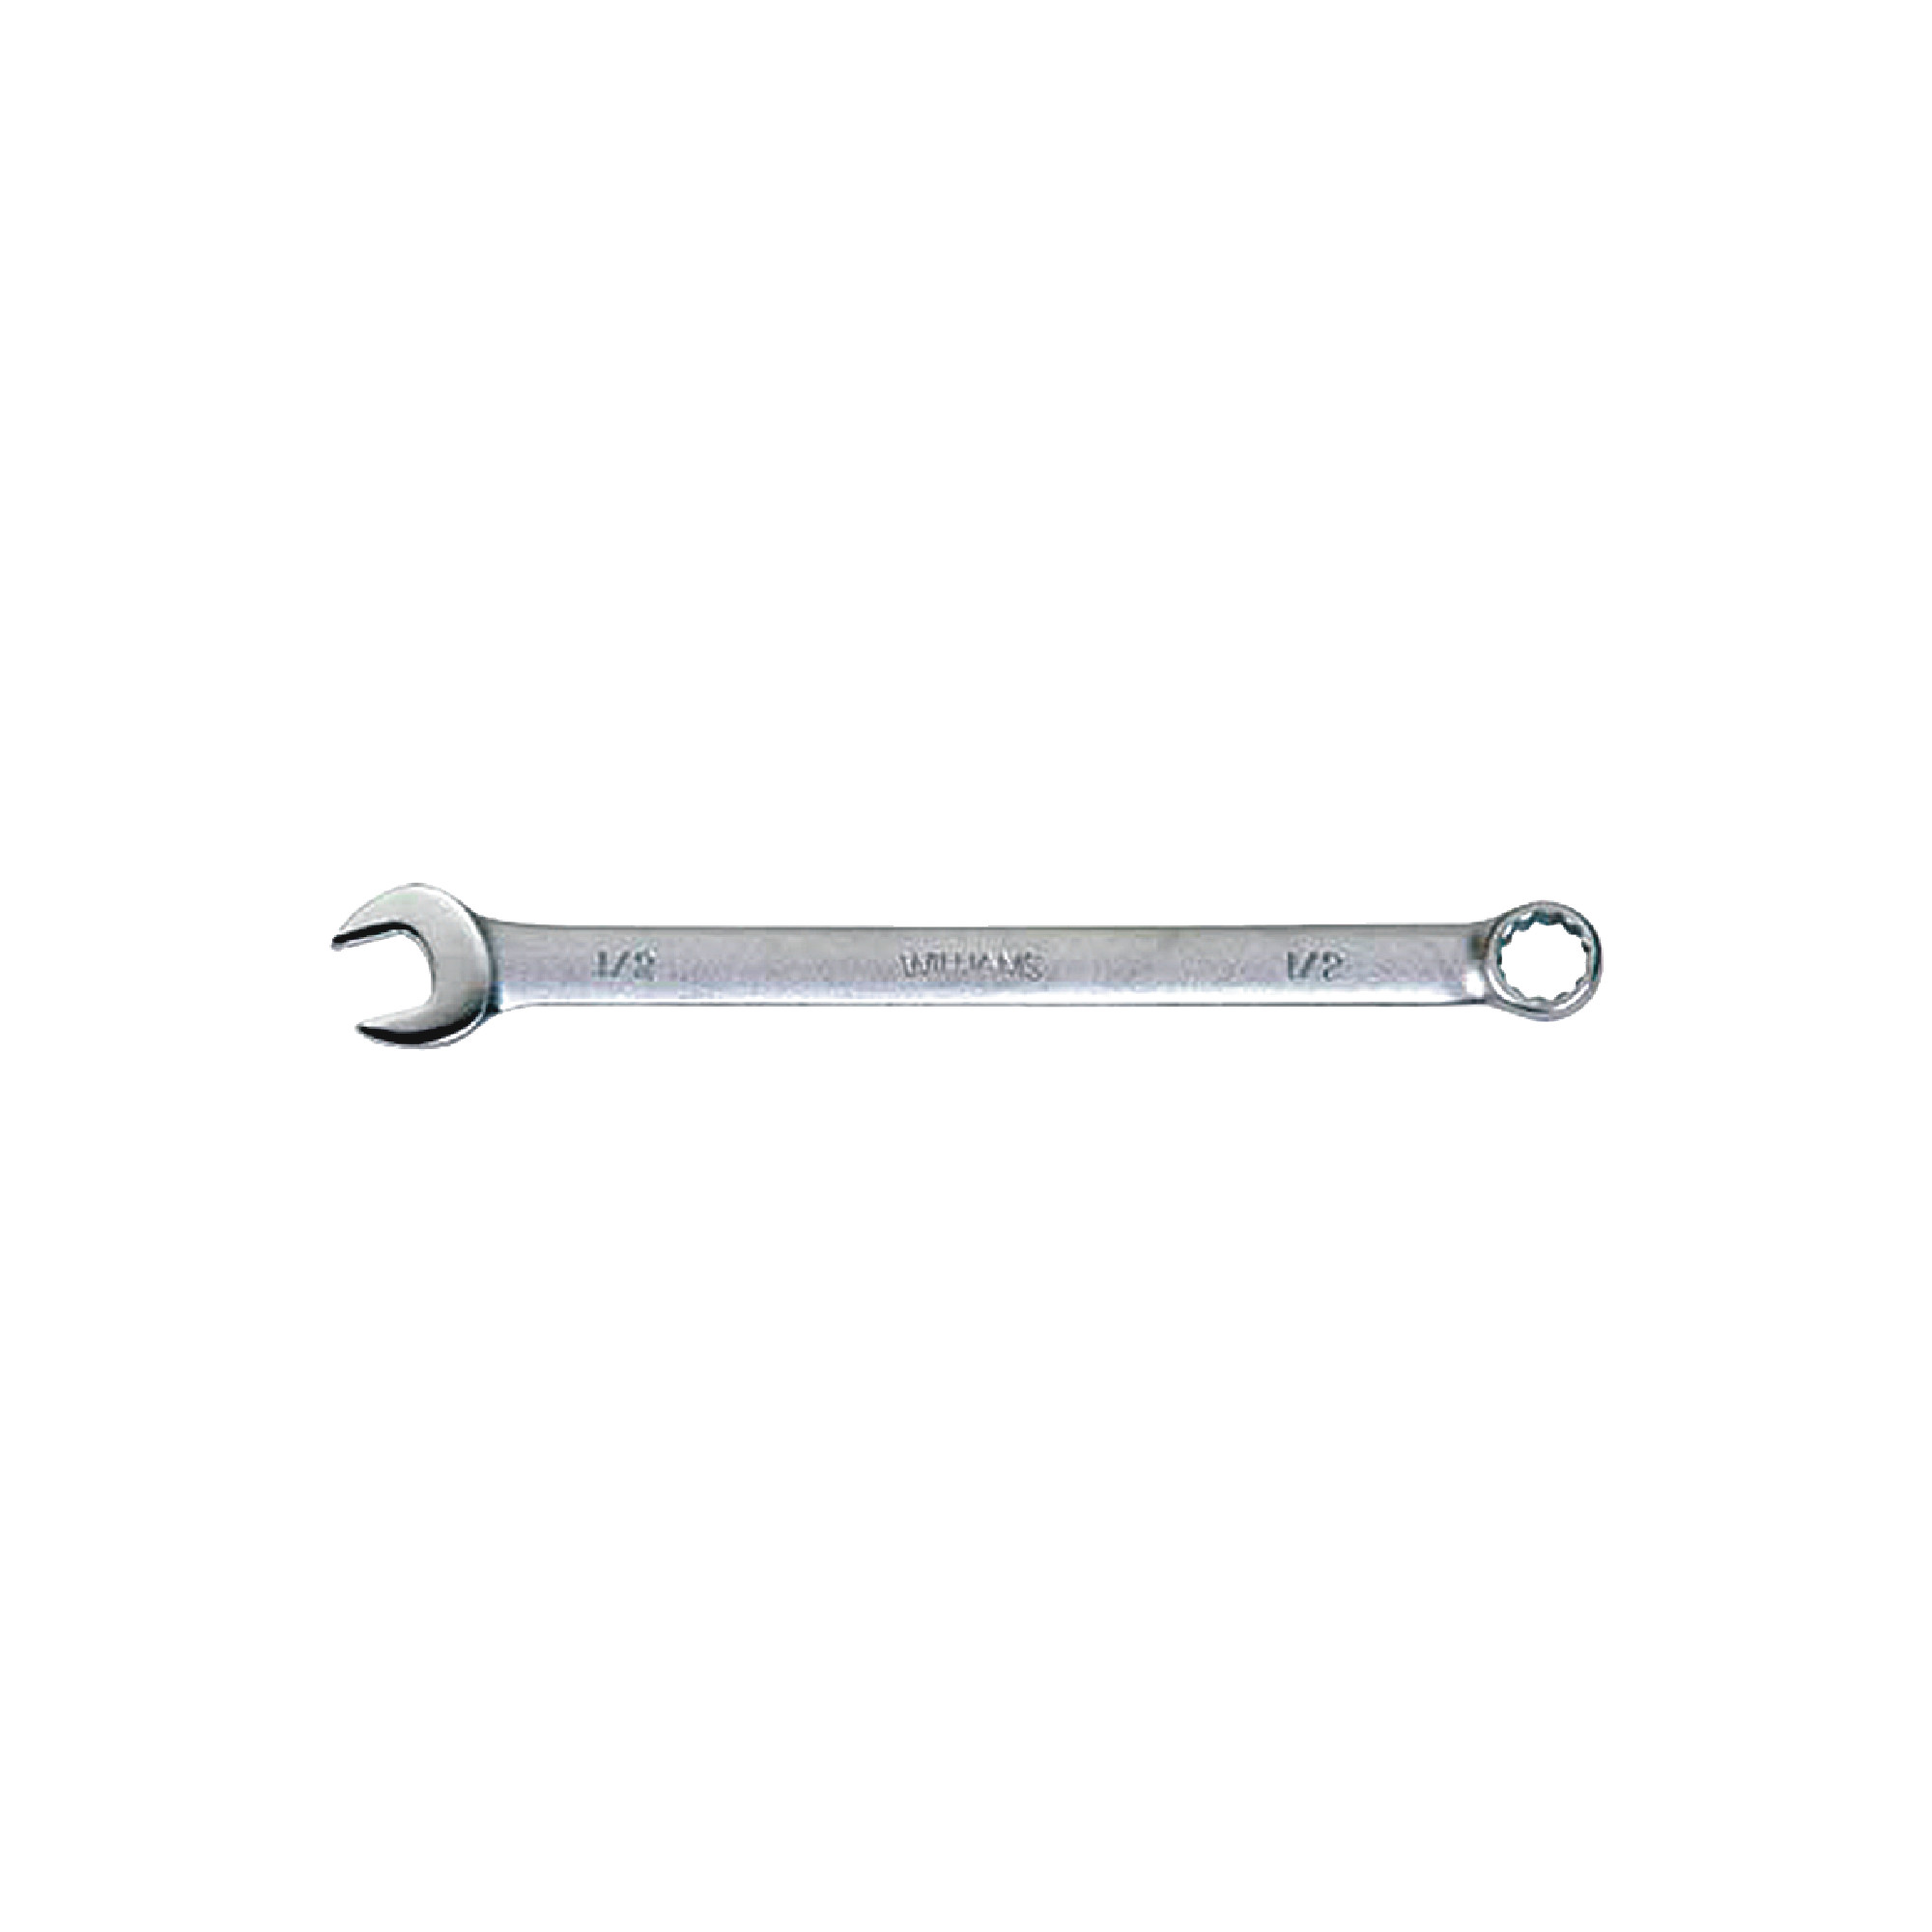 Satin Chrome Finish 15mm Combination Wrench